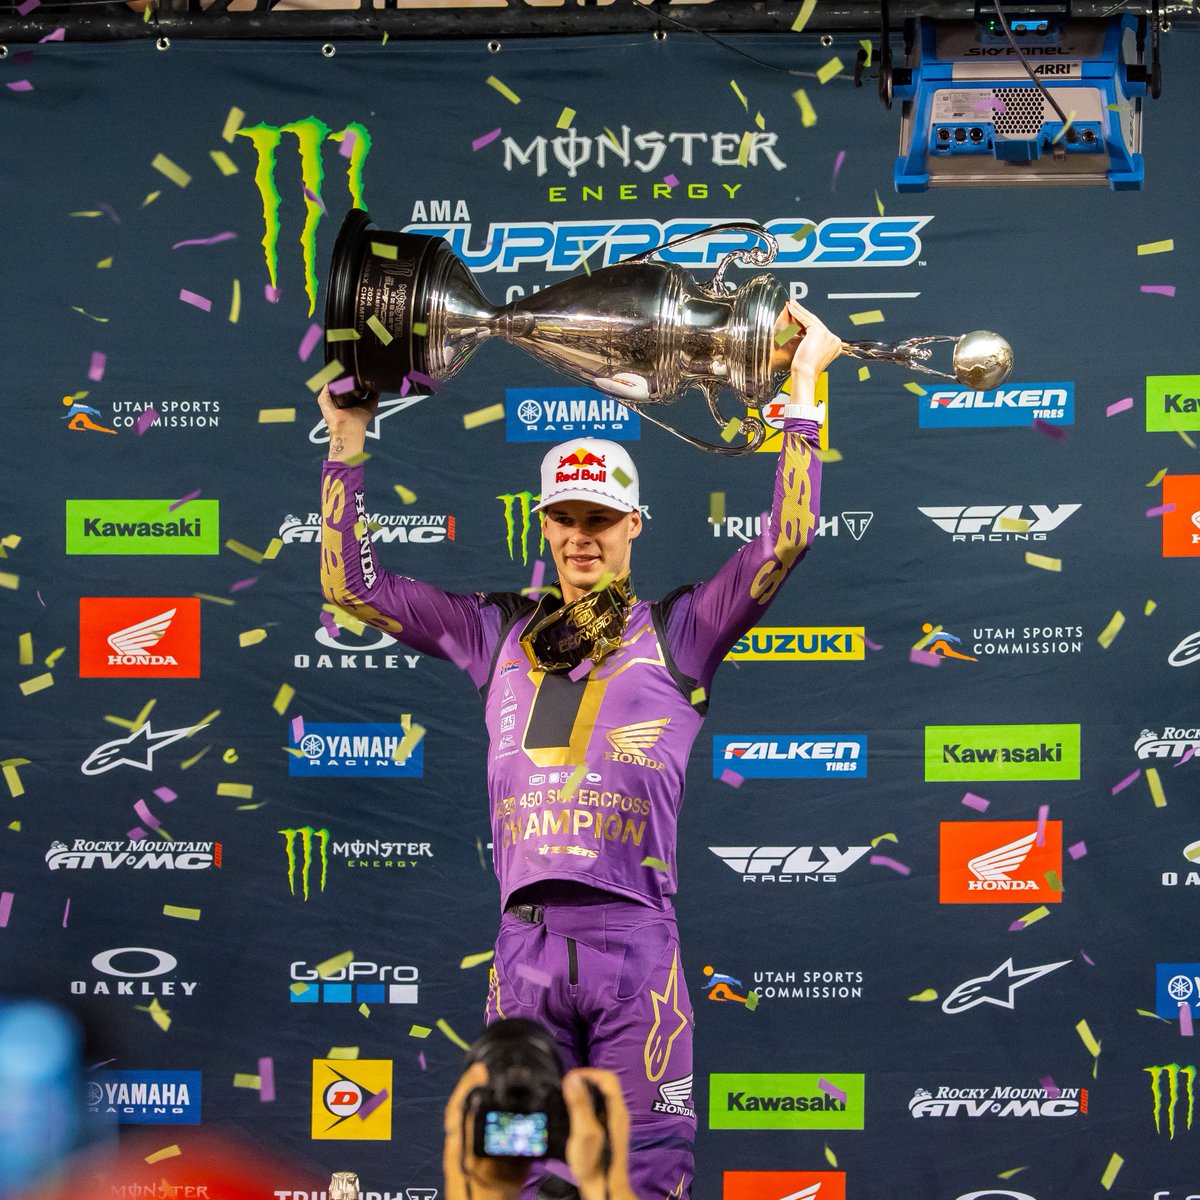 Purple reign. 👑 The rookie. The CHAMPION 🏆 #Honda #SupercrossLIVE #JettLawrence